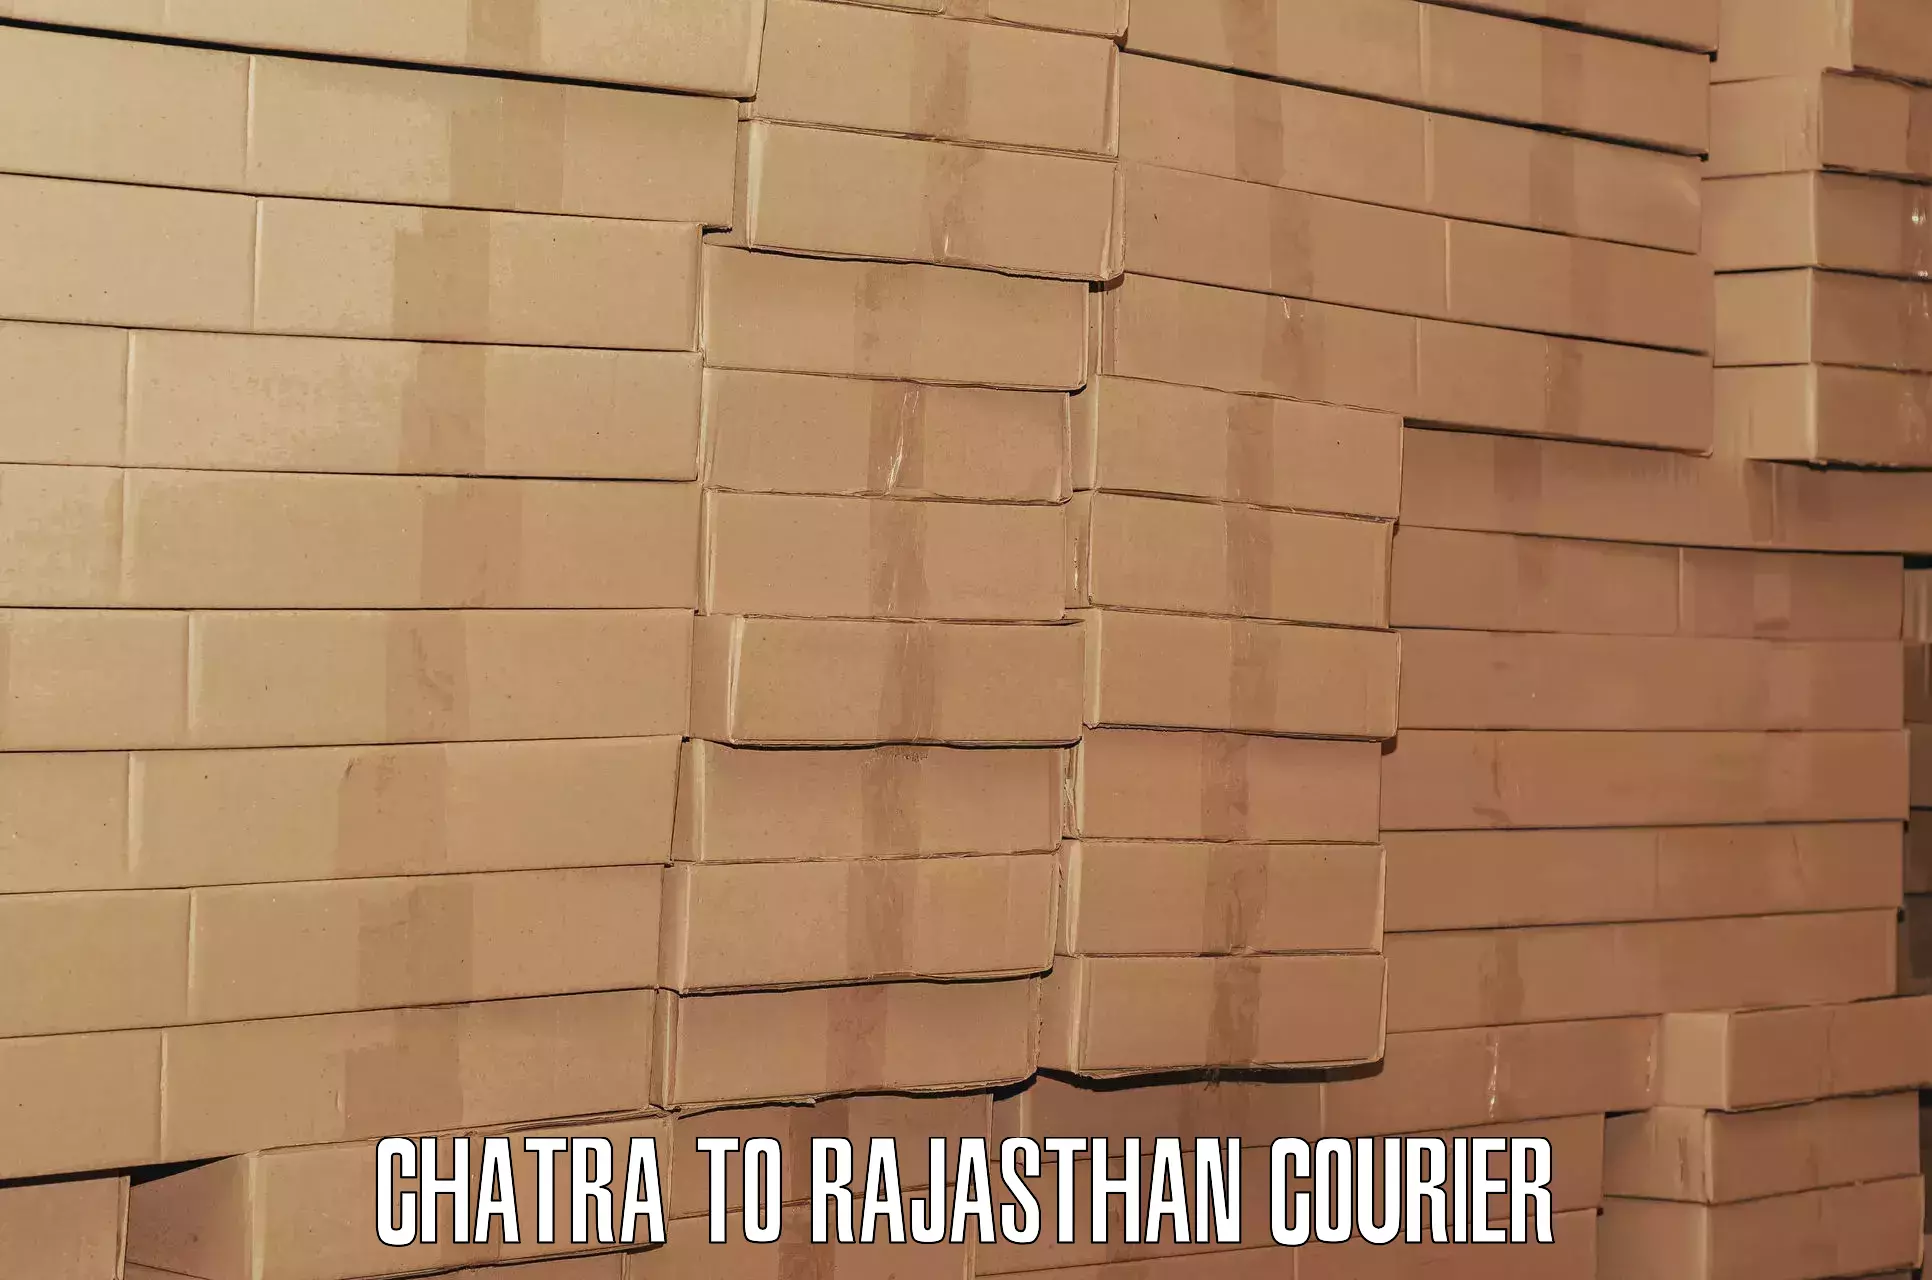 Baggage relocation service Chatra to Rajasthan